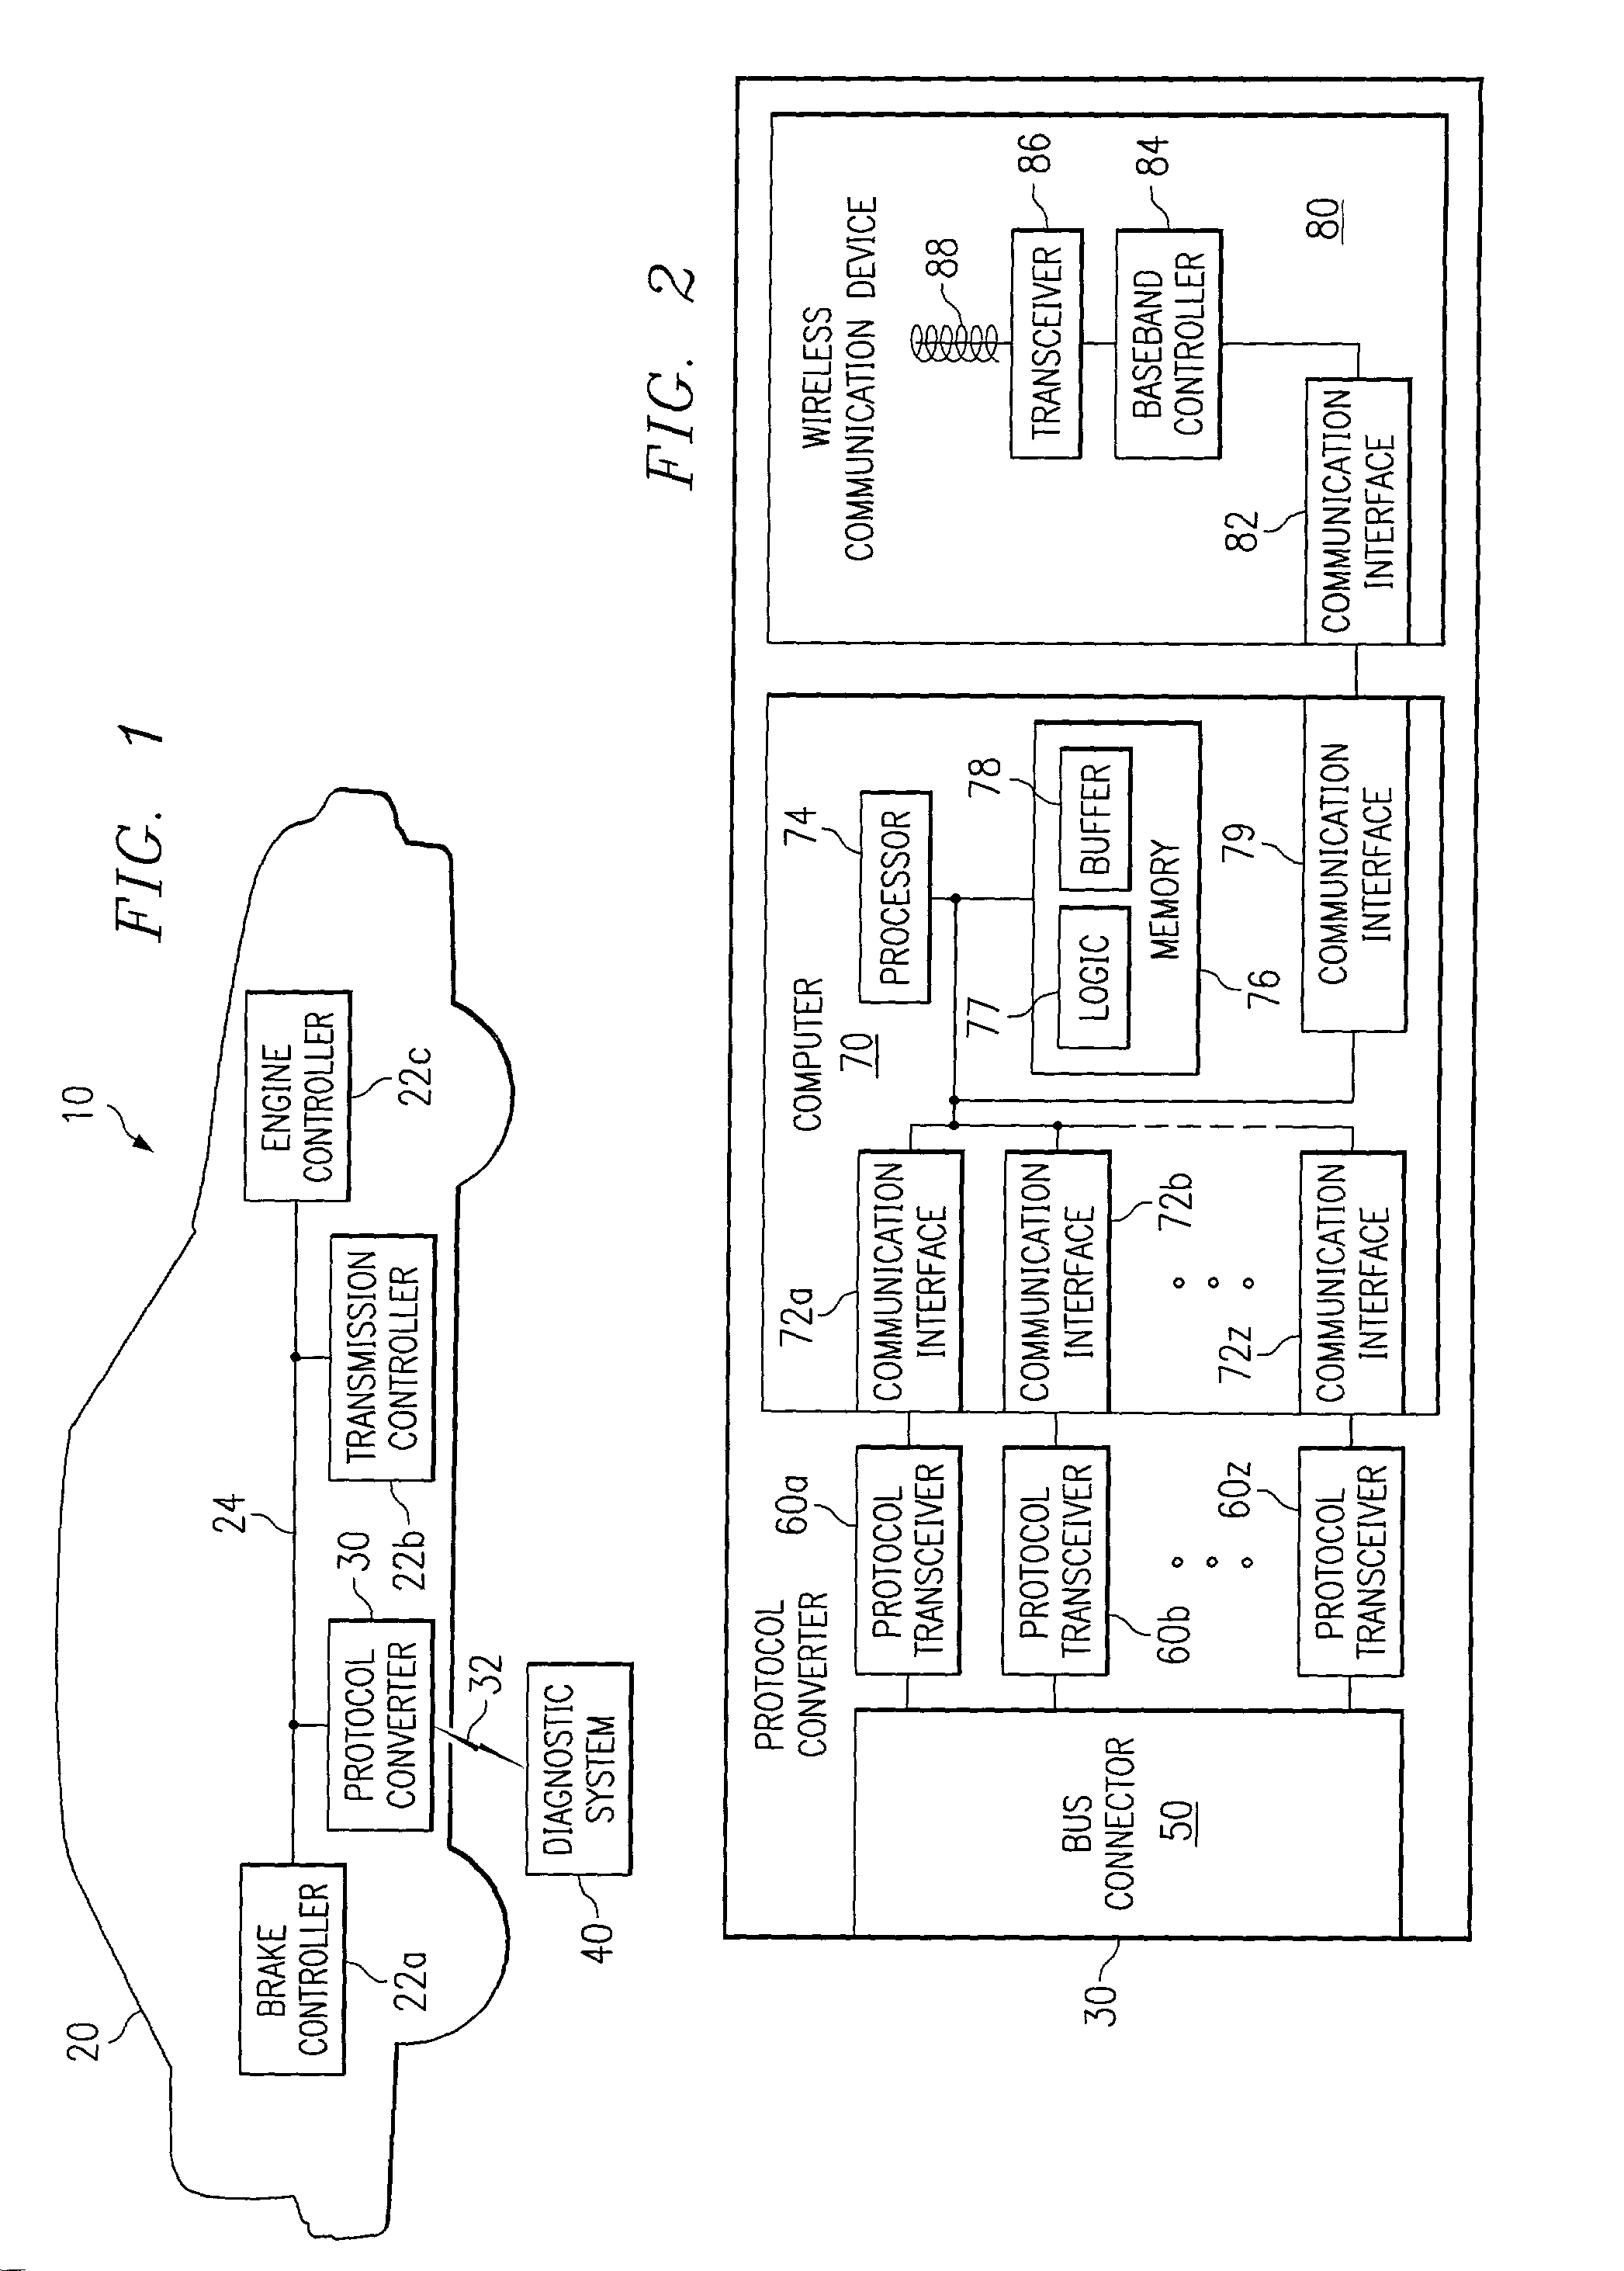 System and method for managing wireless vehicular communications